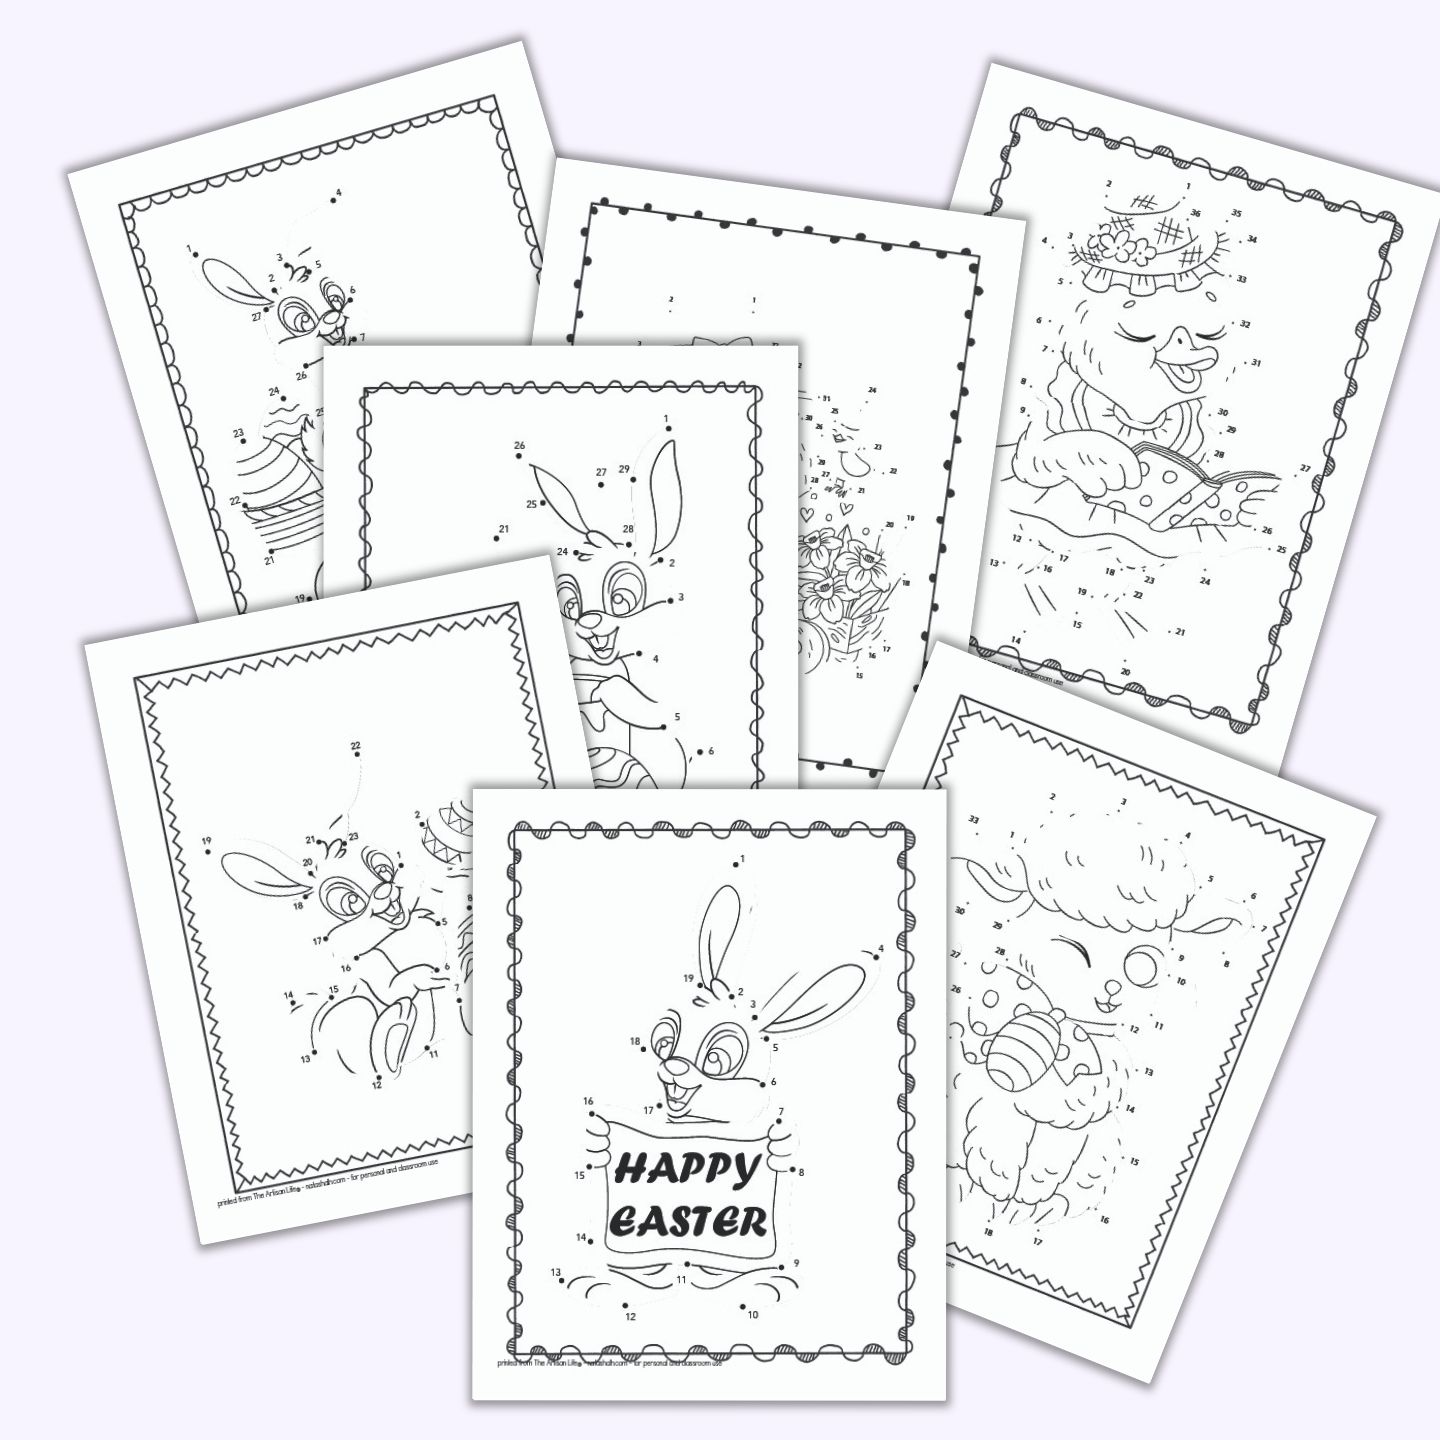 free-easter-dot-to-dot-printables-for-kids-a-no-prep-easter-activity-the-artisan-life